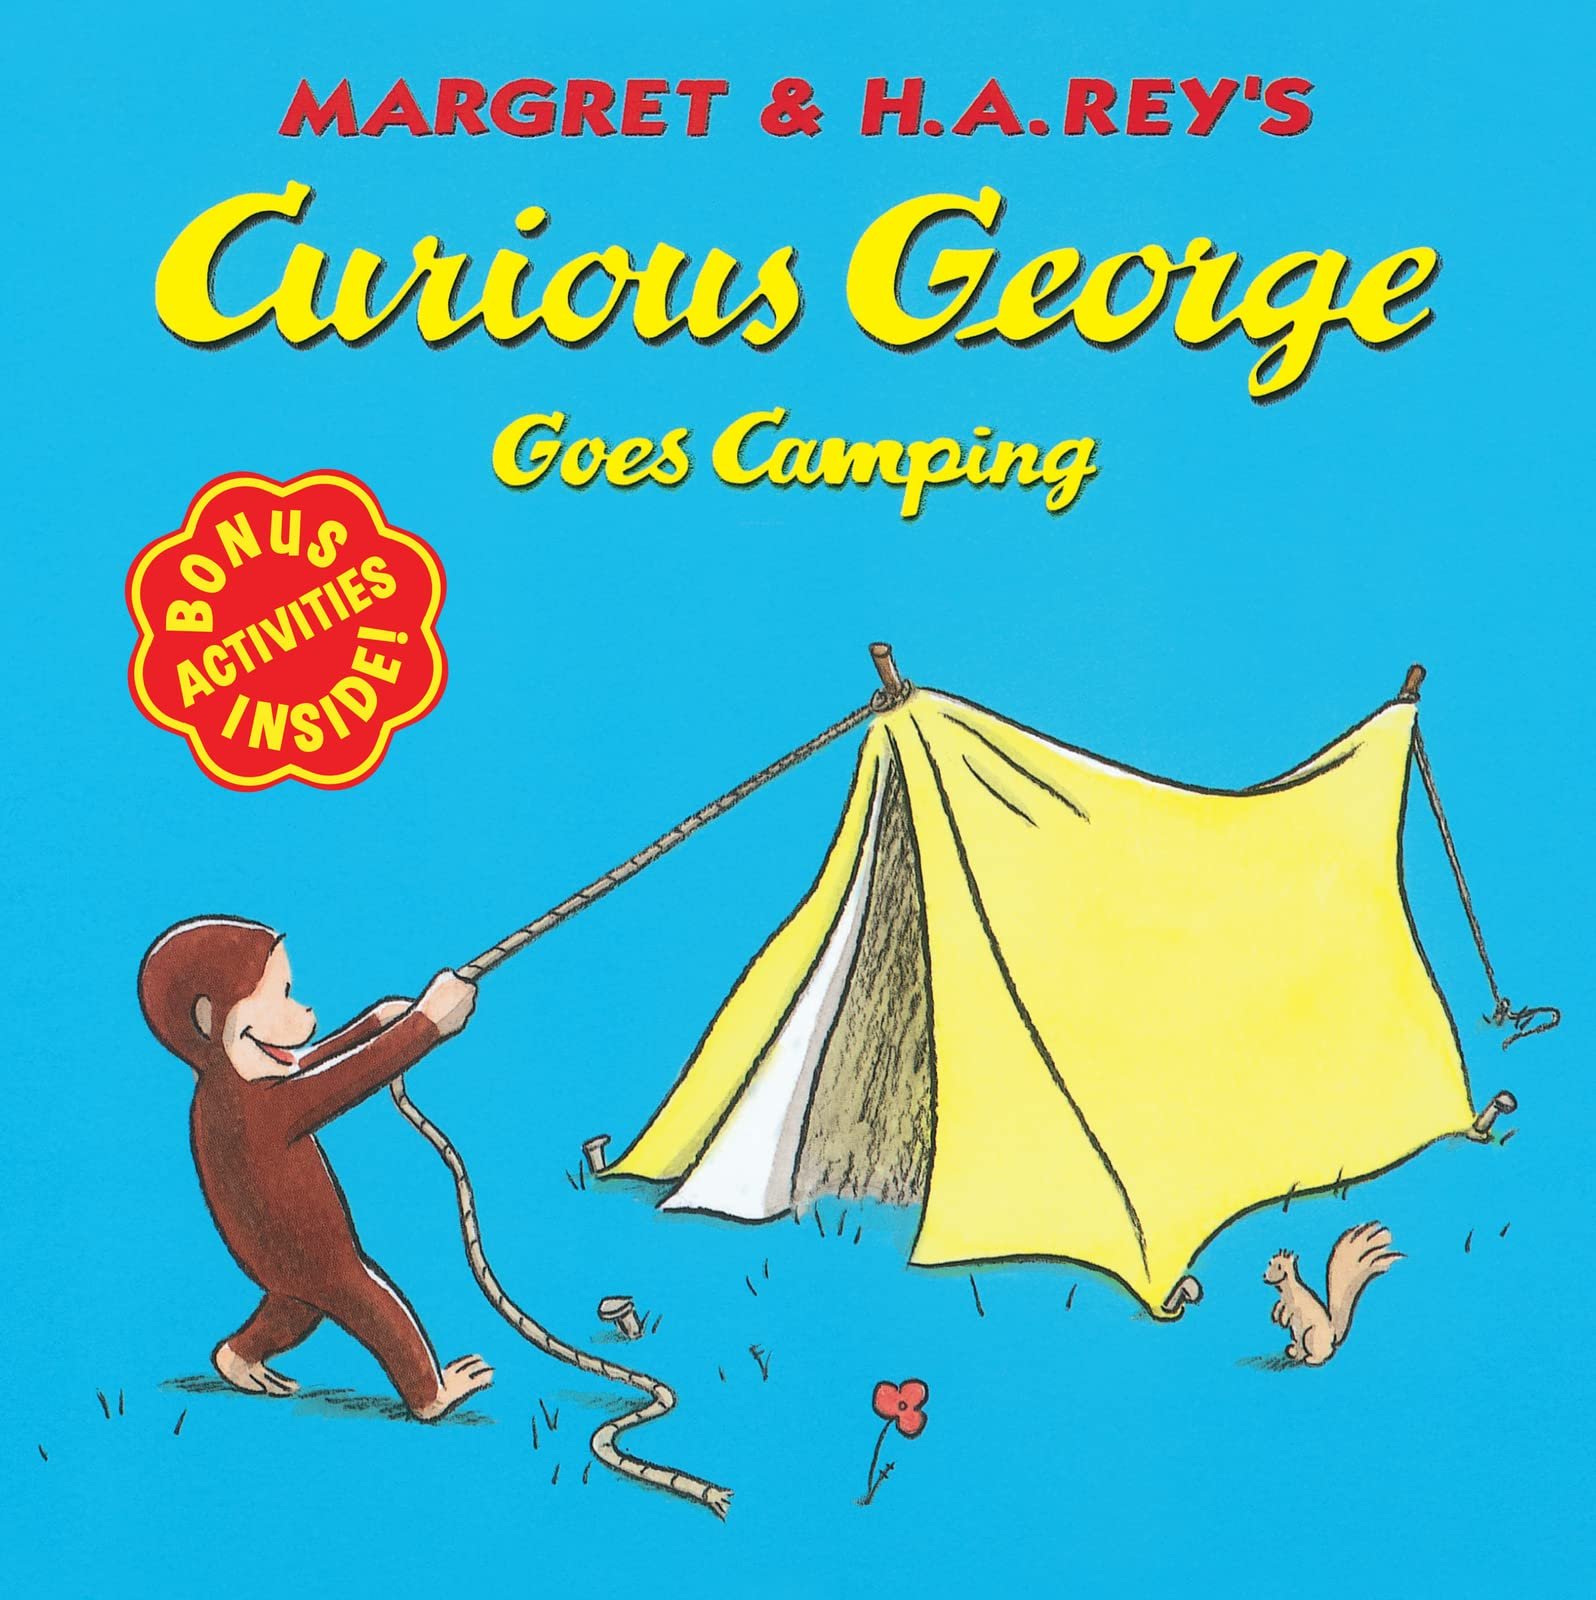 ONE Happy Camper: Baby Books About Camping